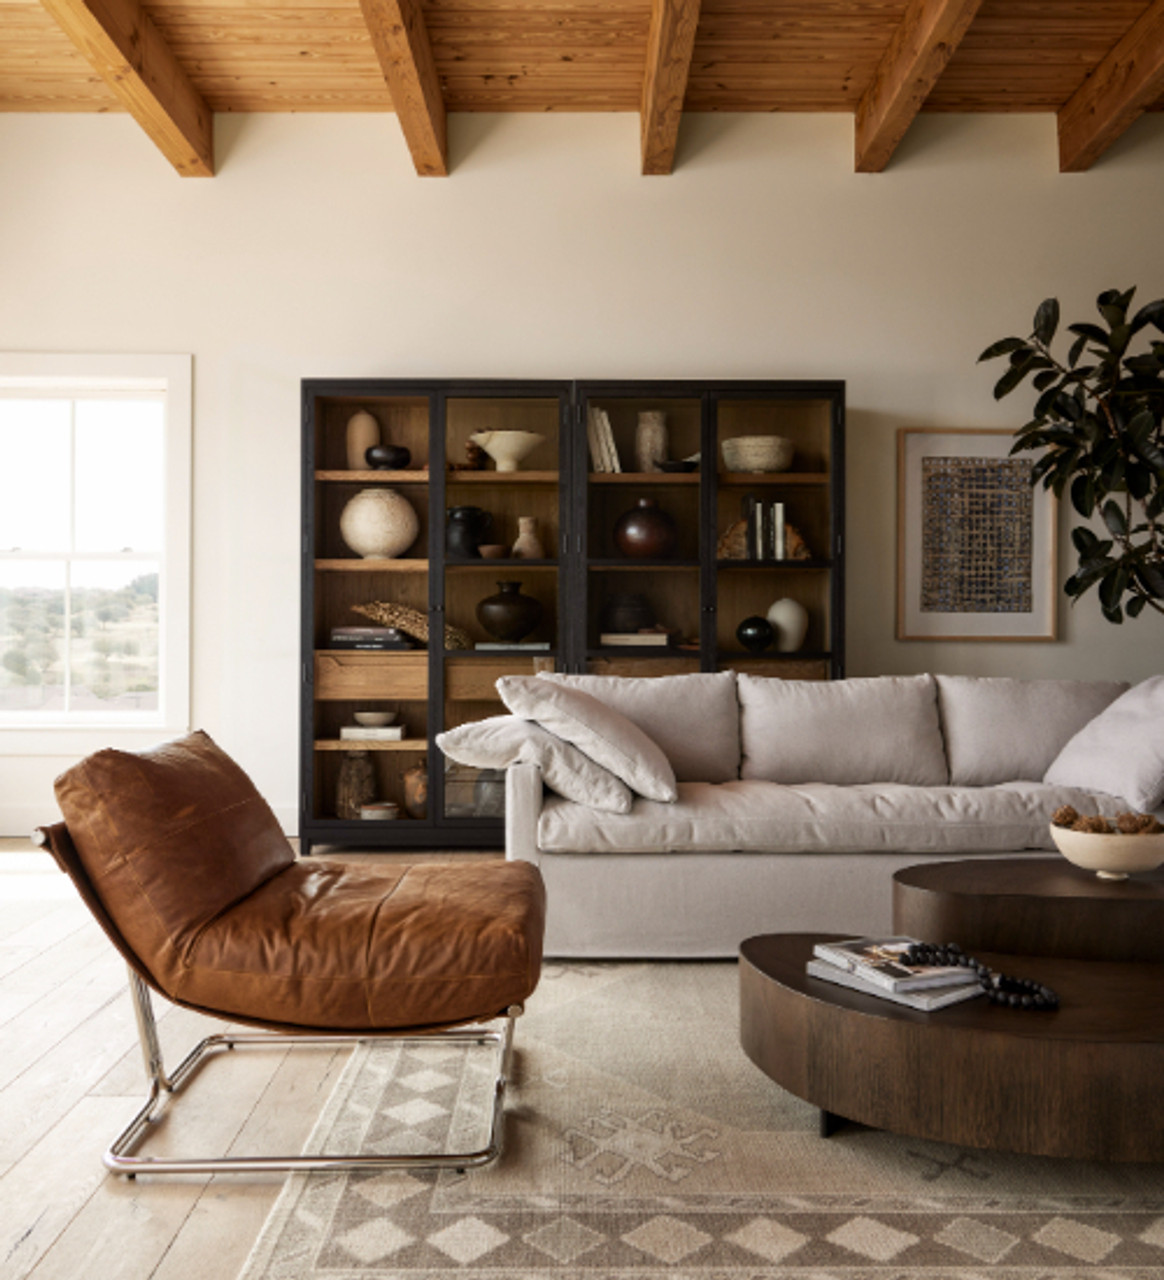 The Perfect Balance of Handmade and Upscale Furniture